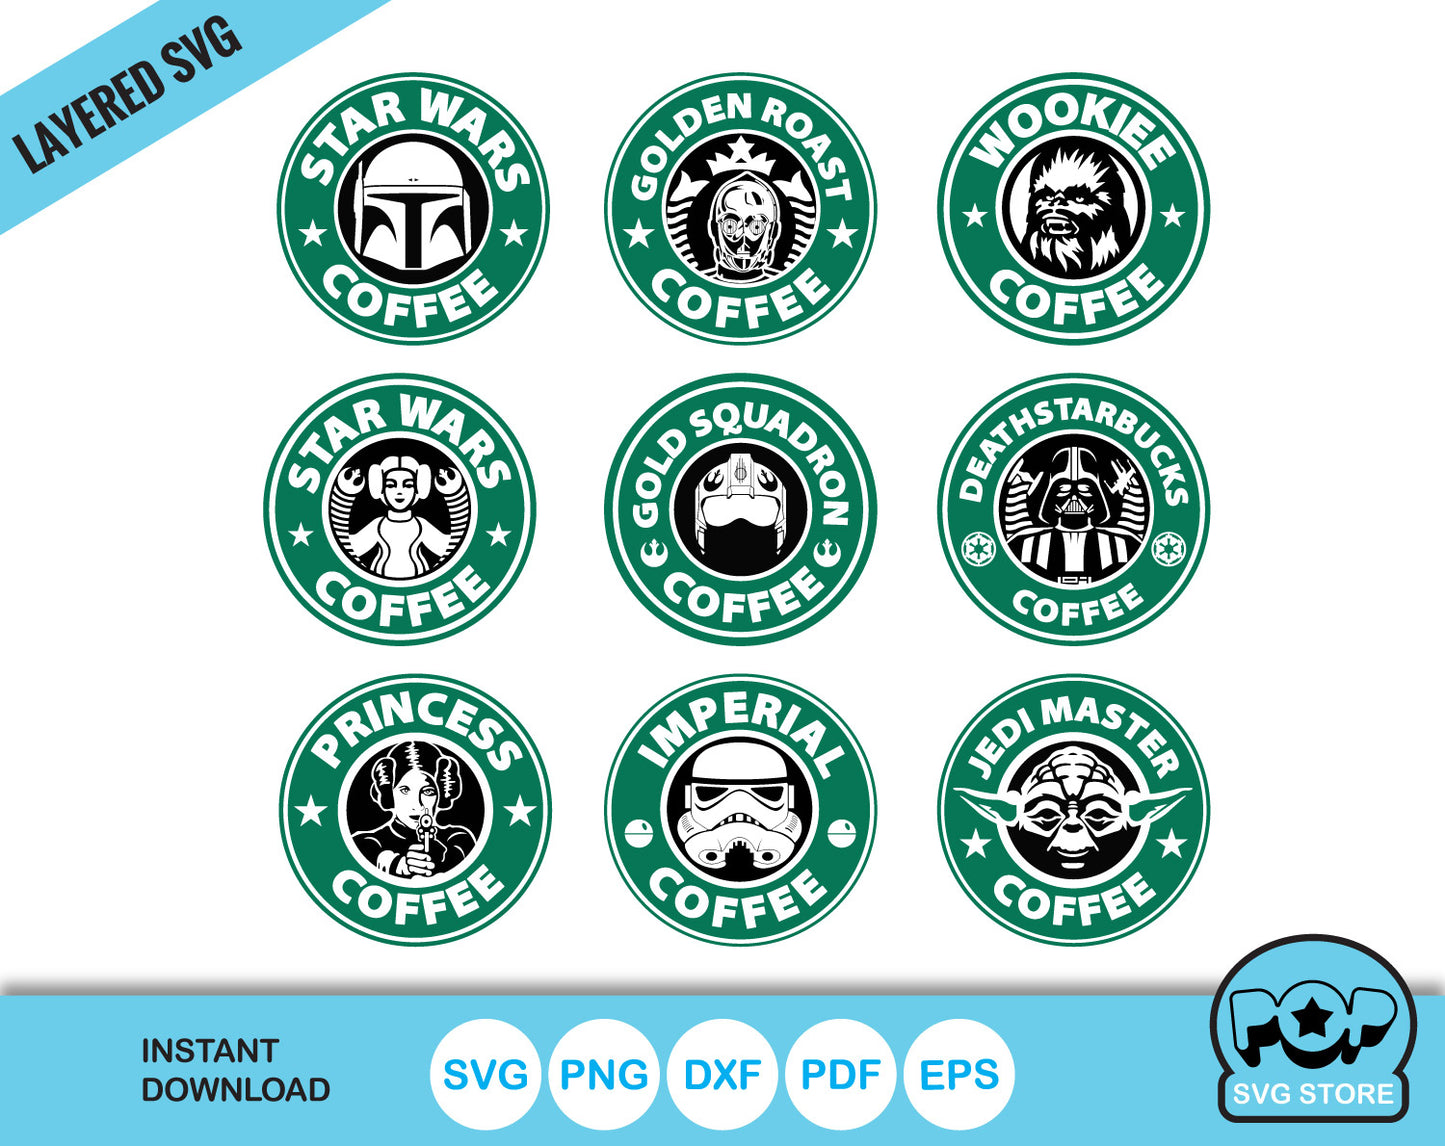 Starbucks Star Wars Coffee clipart set, SVG cut files for Cricut / Silhouette, instant download